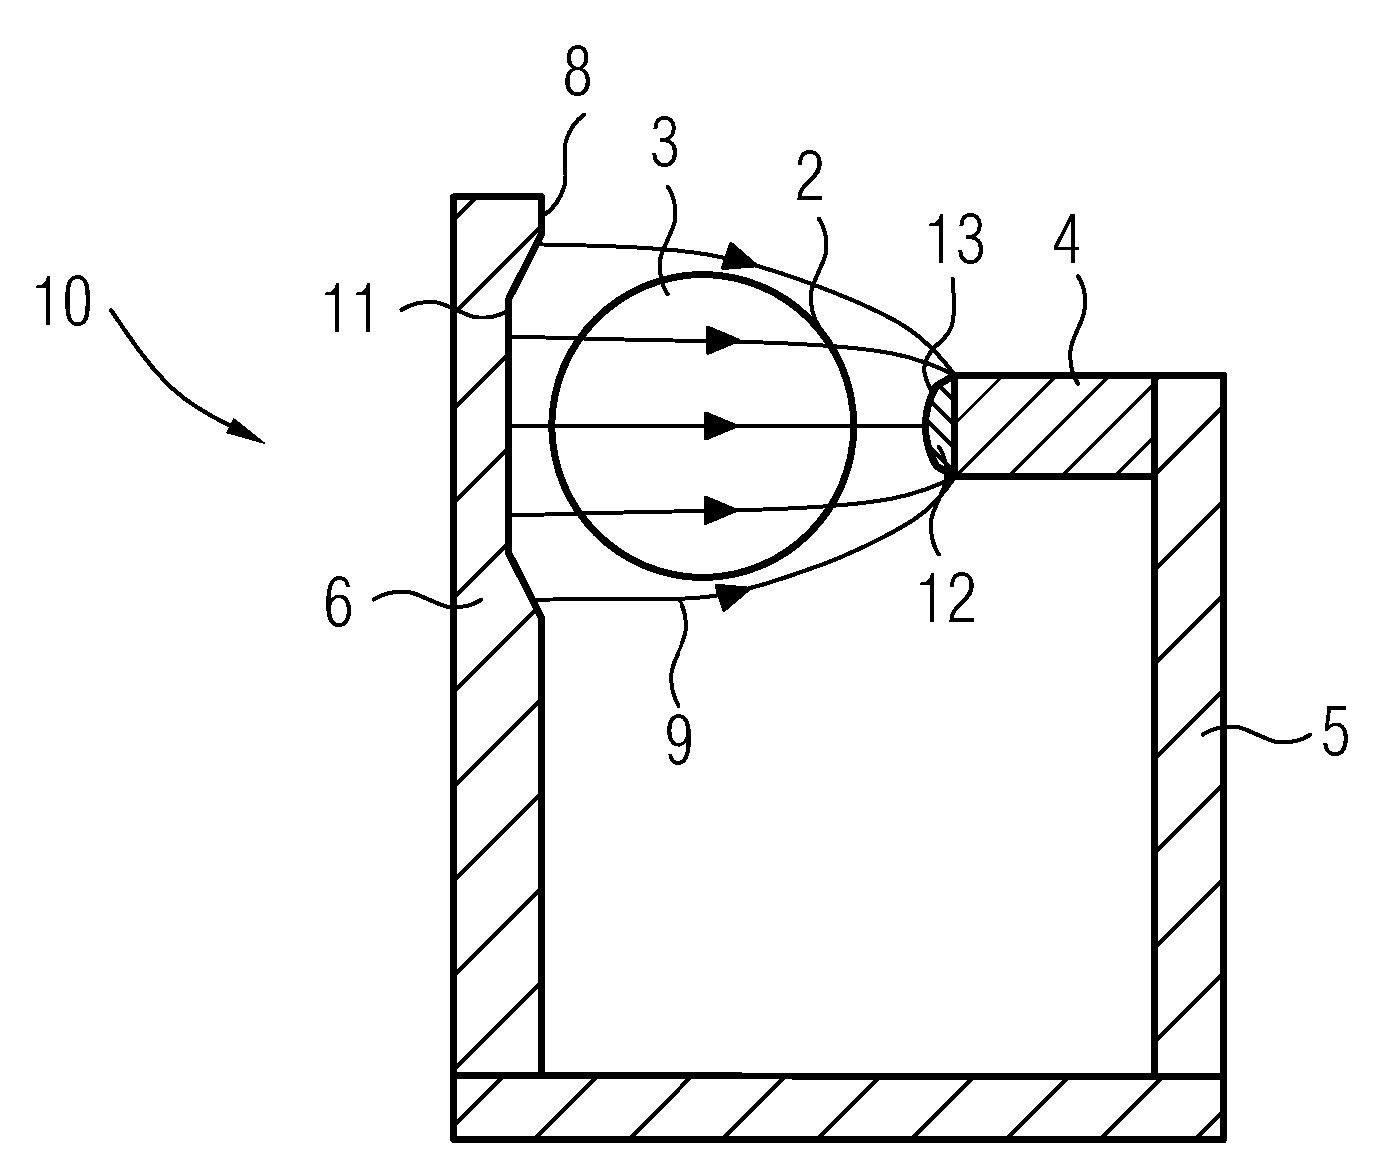 Separating device for separating particles able to be magnetized and particles not able to be magnetized transported in a suspension flowing through a separating channel